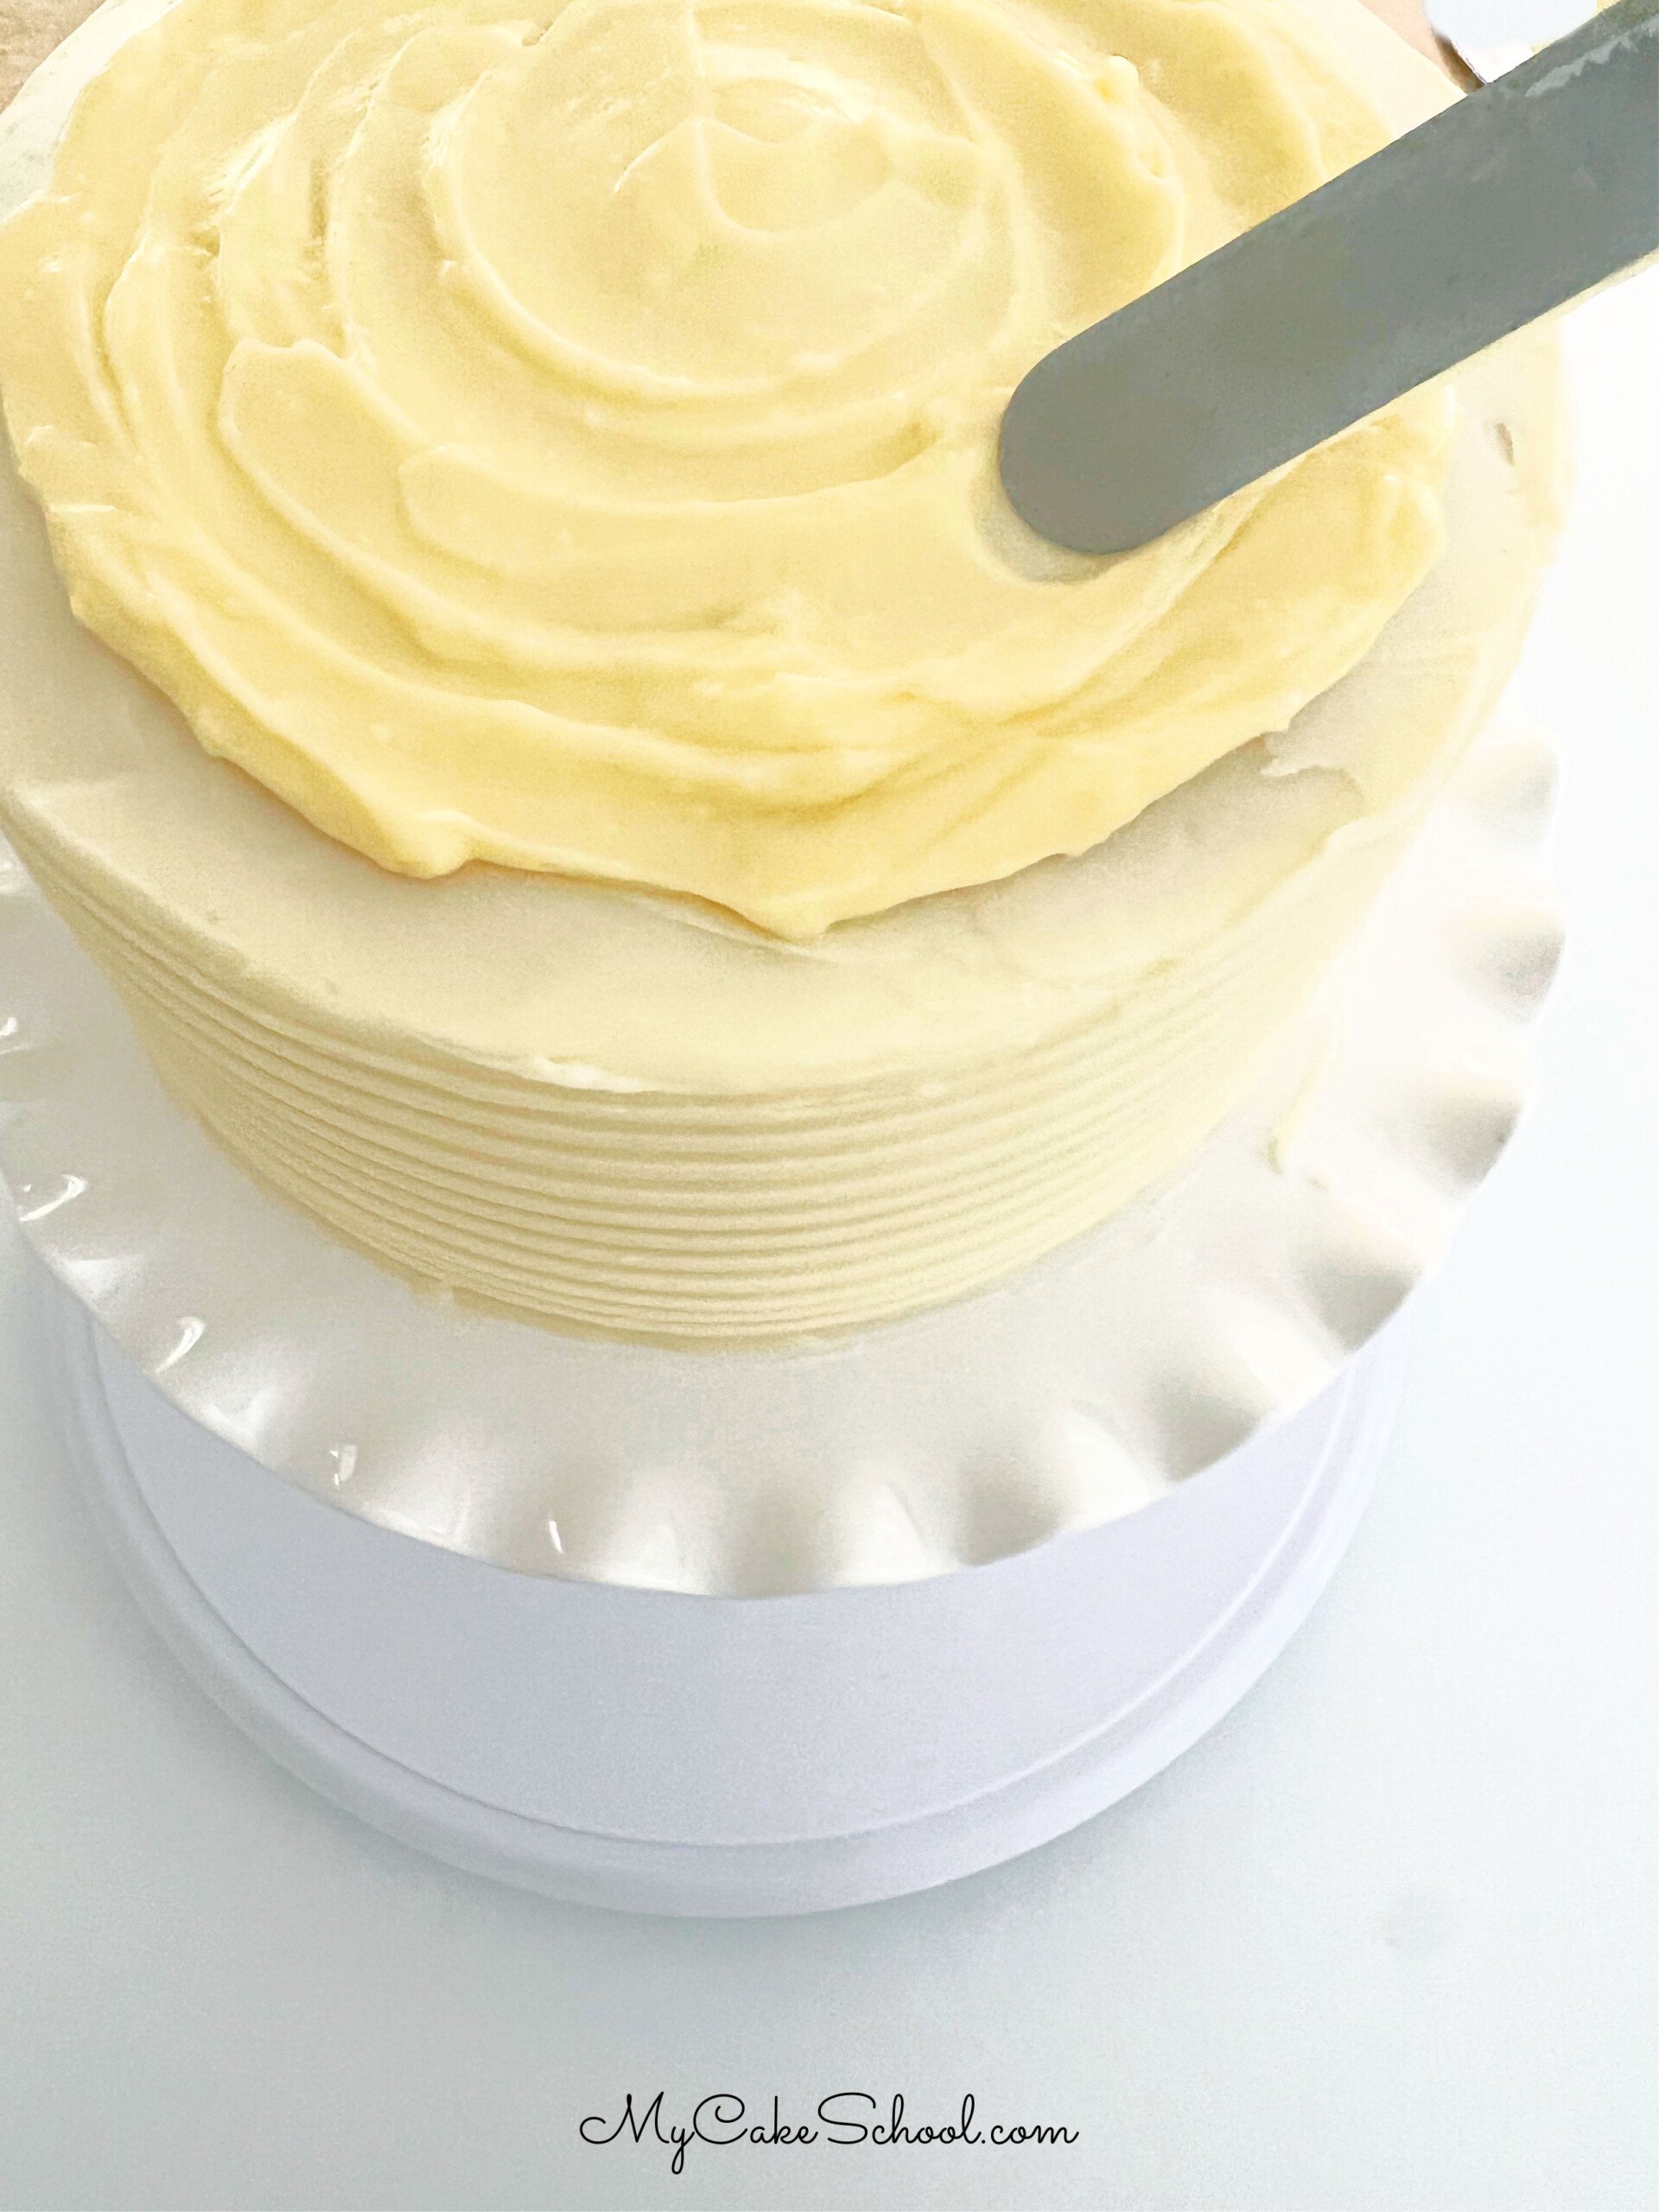 Adding Banana Cream Filling to the top of the Banana Cake with a small offset spatula.